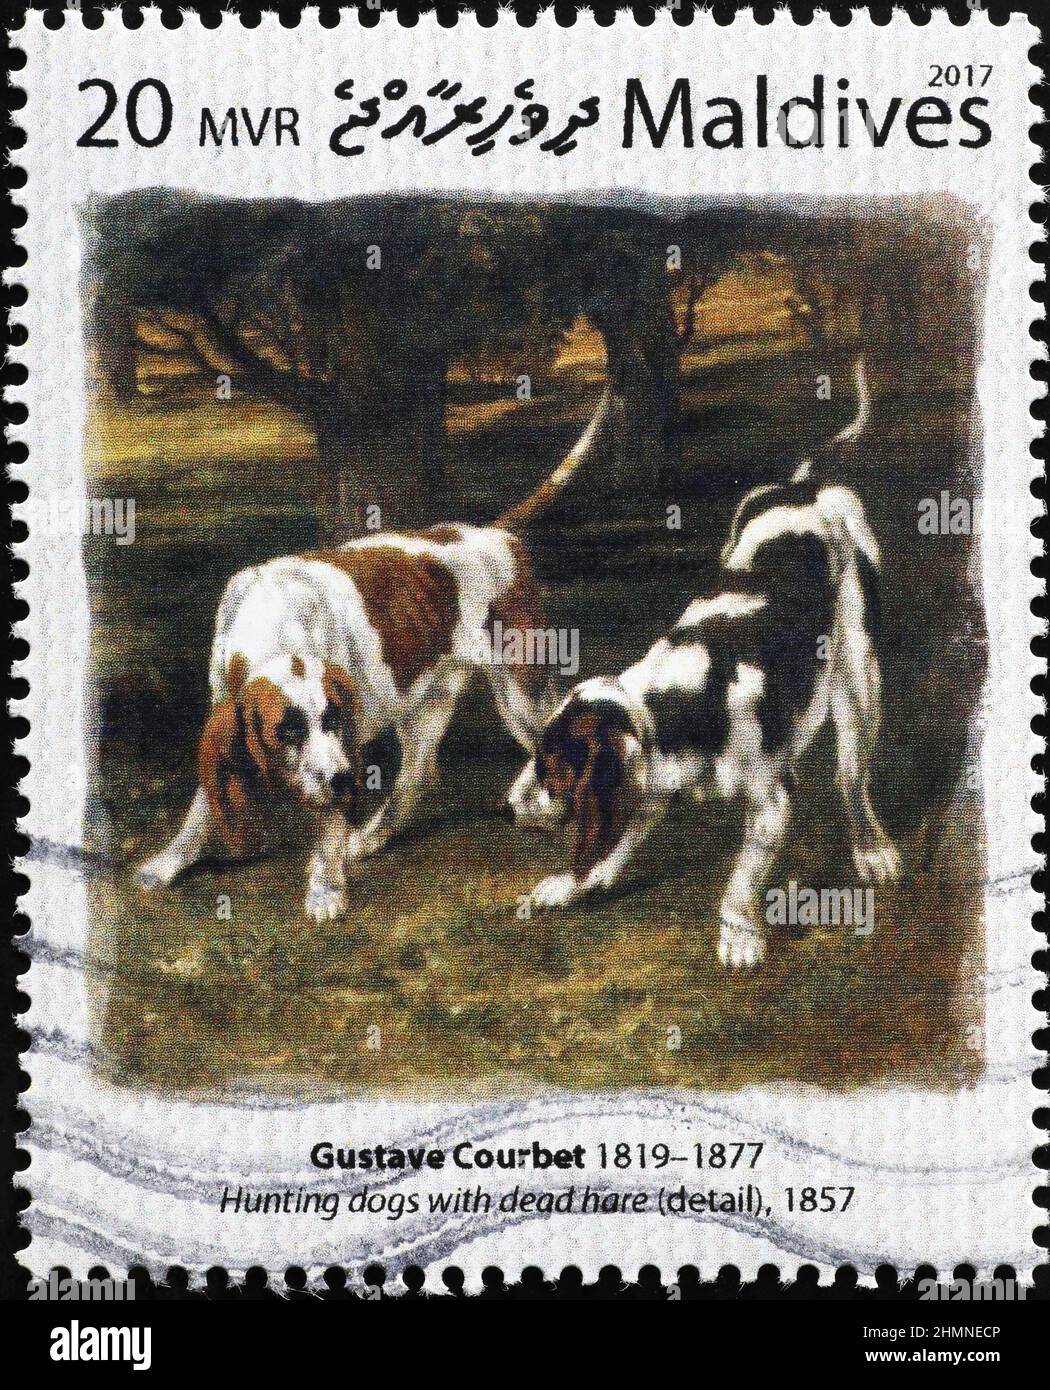 Hunting dogs by Gustave Corbet on postage stamp Stock Photo